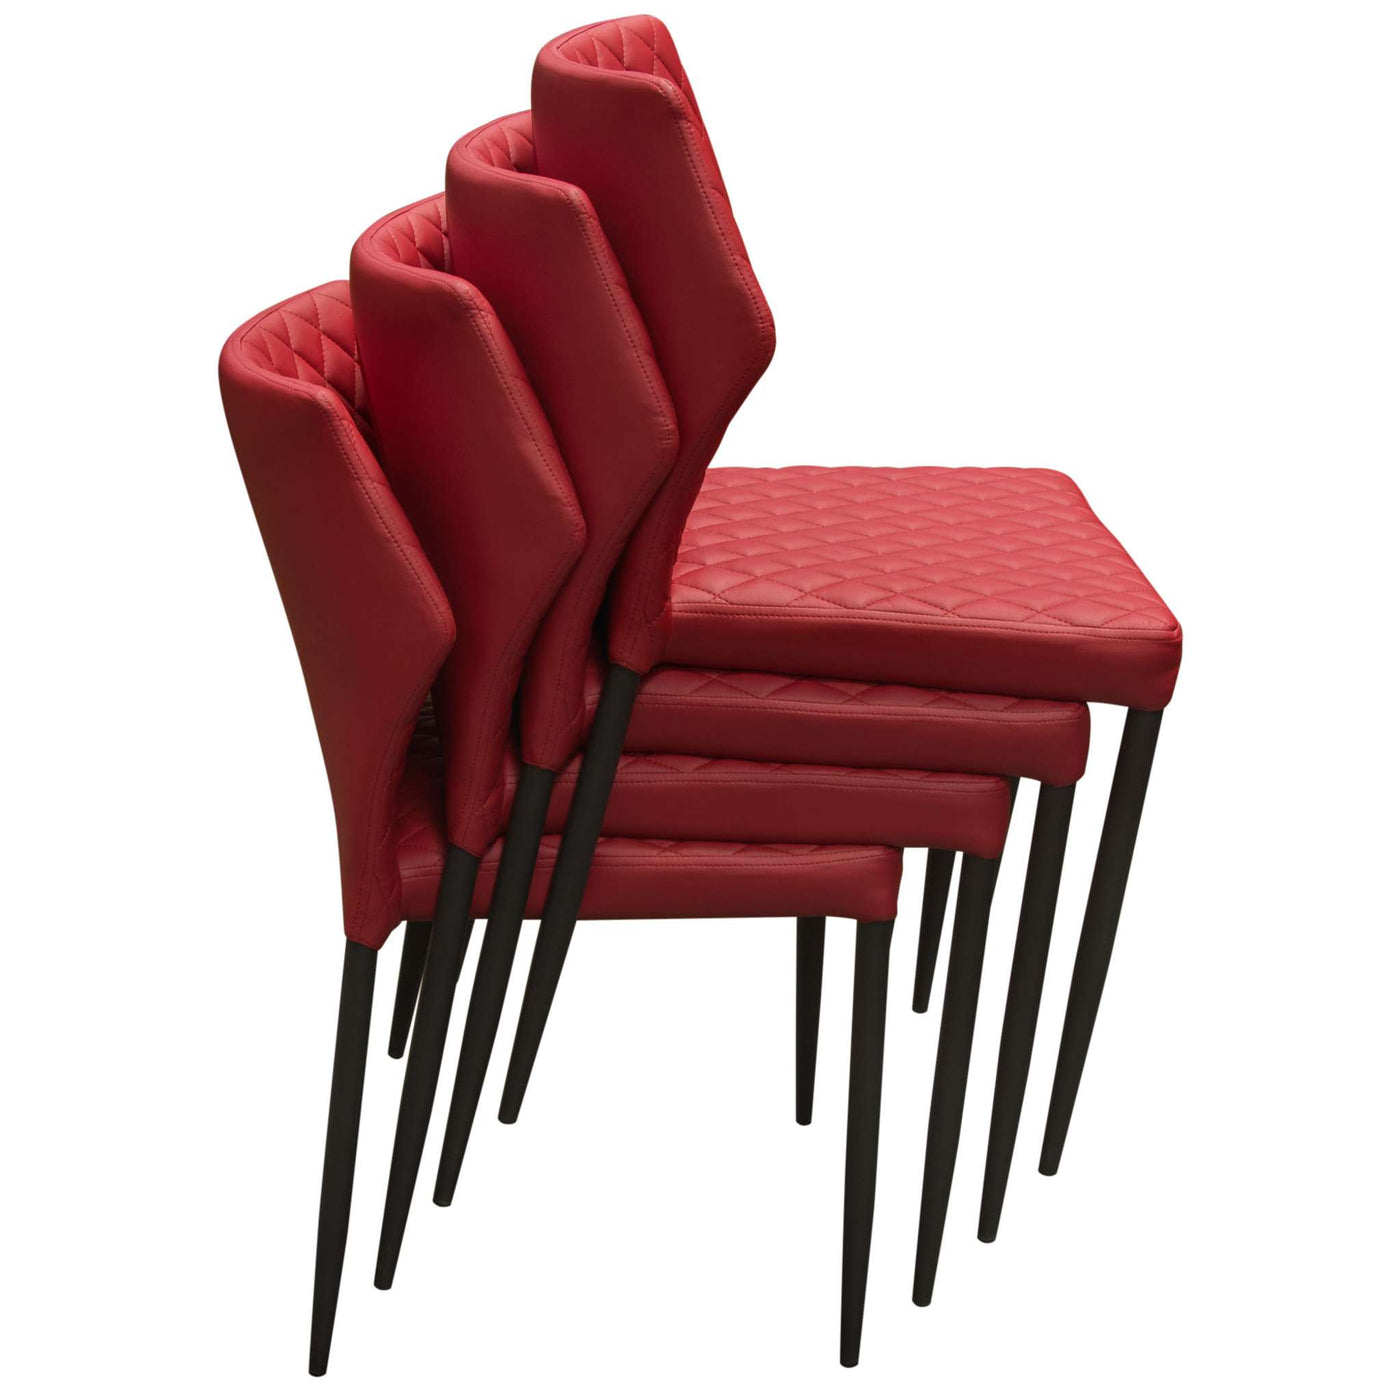 Milo 4-Pack Dining Chairs in Diamond Tufted Leatherette with Black Powder Coat Legs by Diamond Sofa